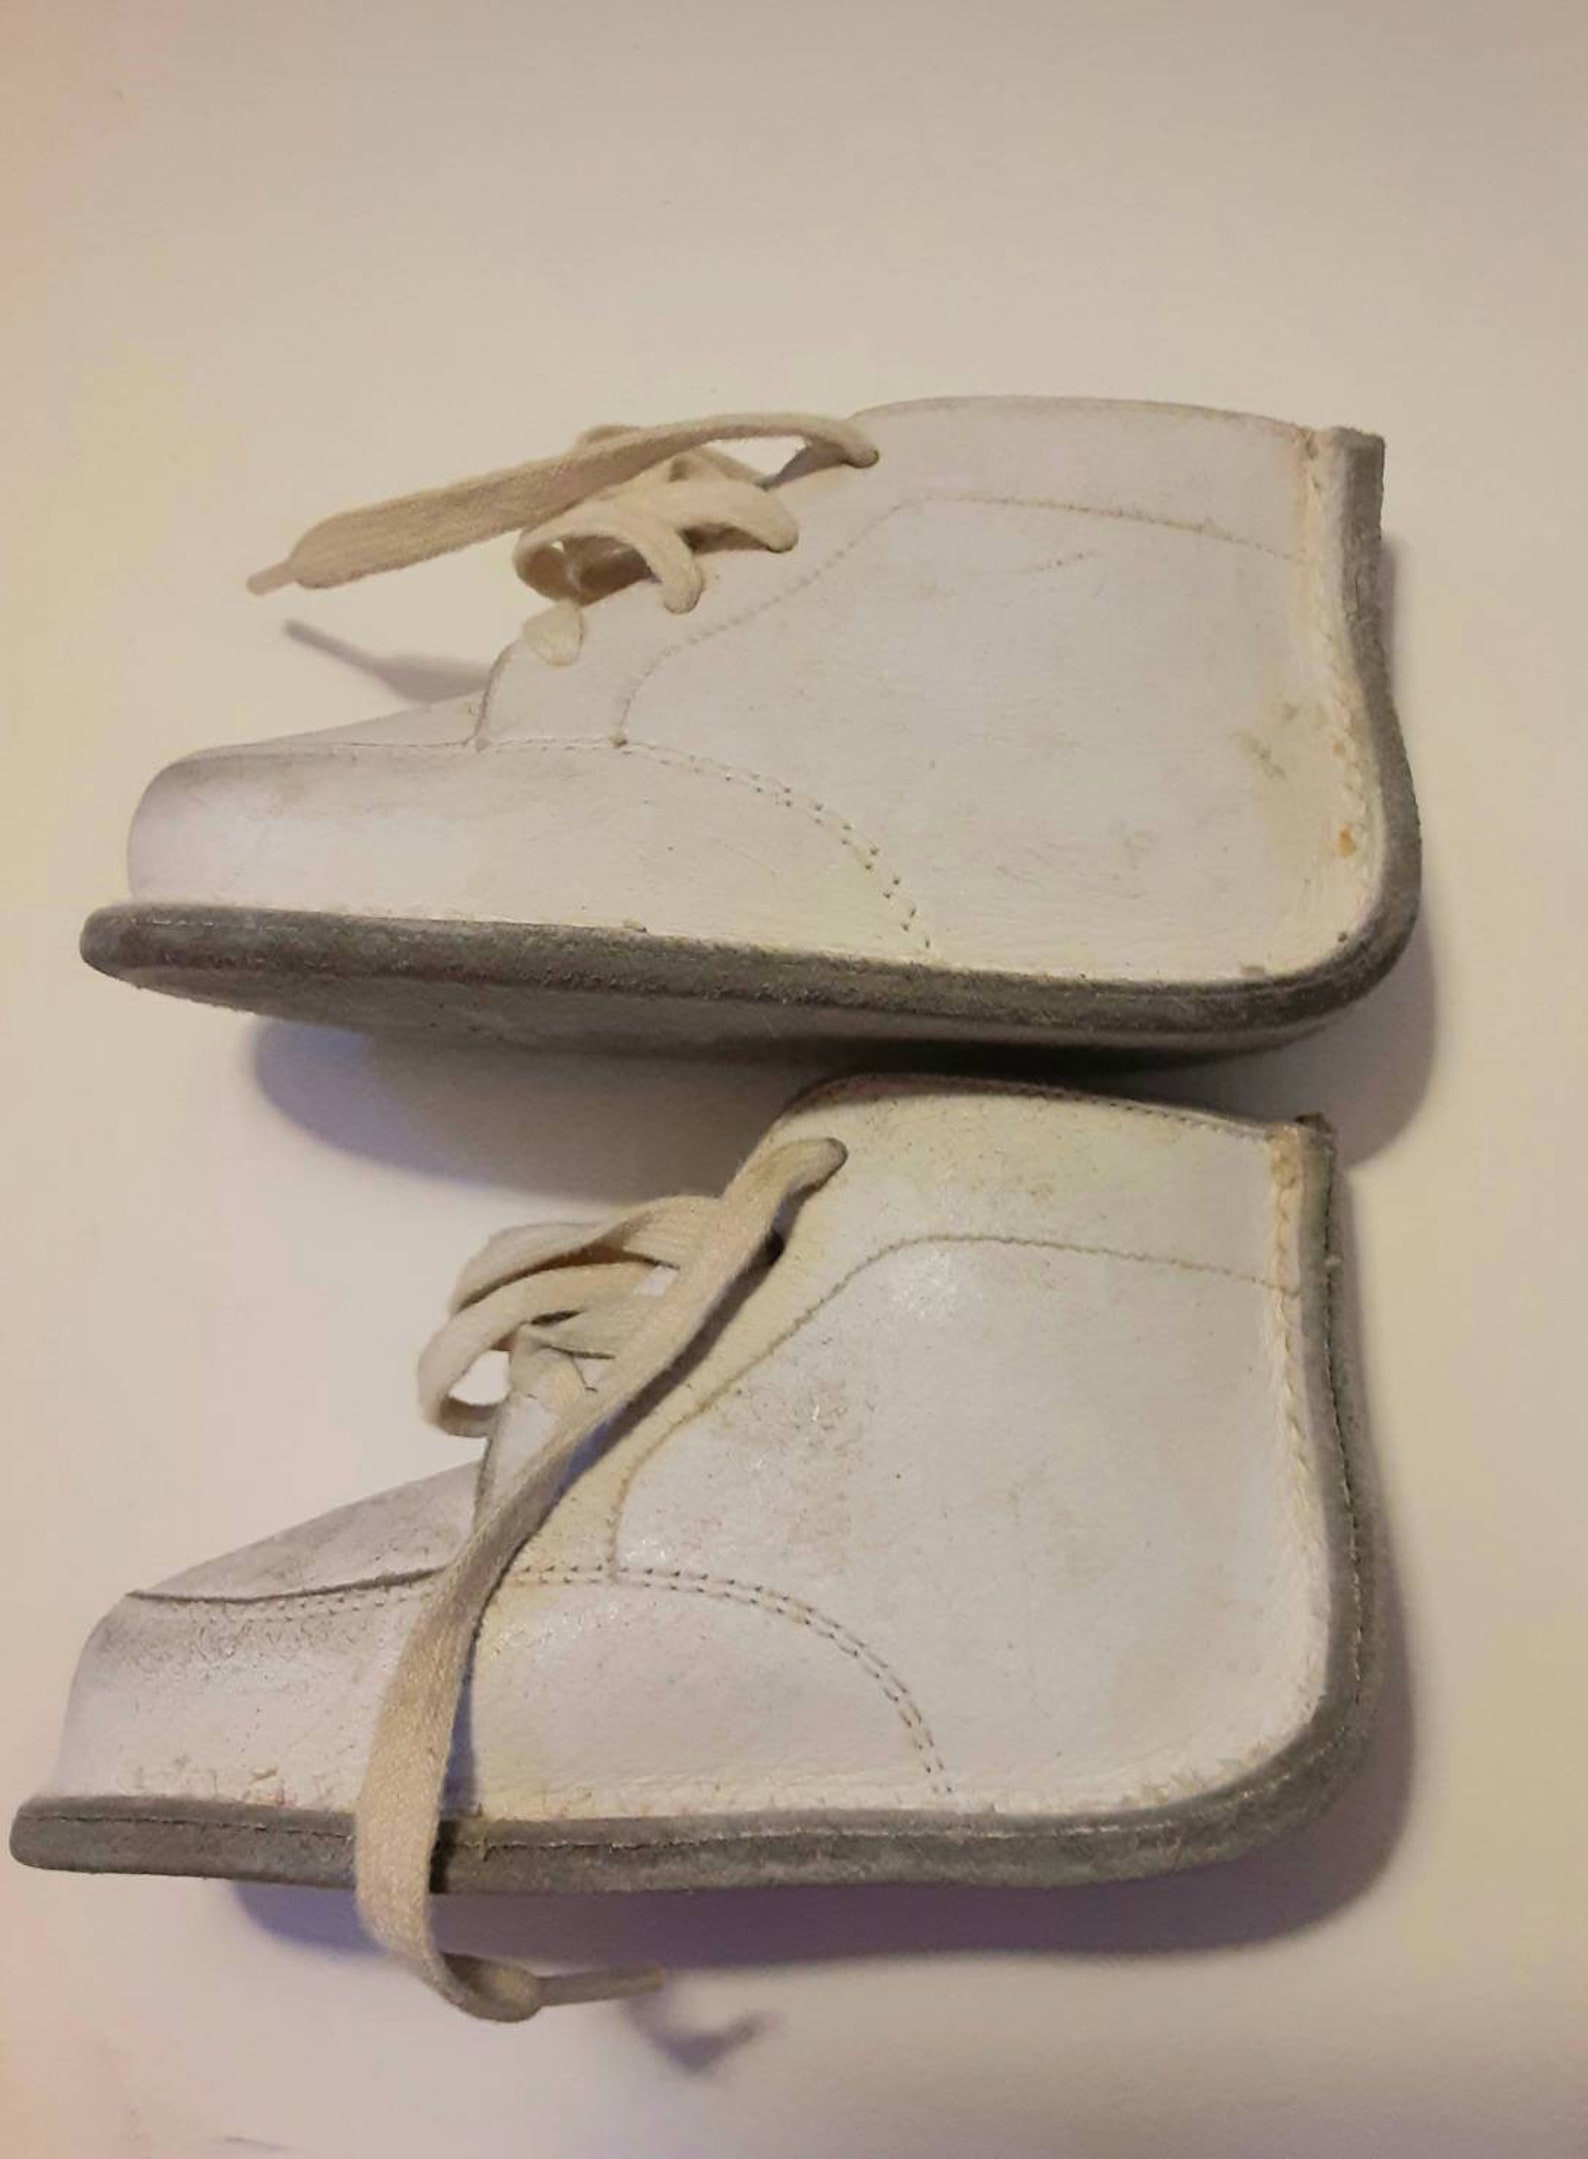 Vintage Baby Jumping Jacks Leather Baby Shoes | Etsy